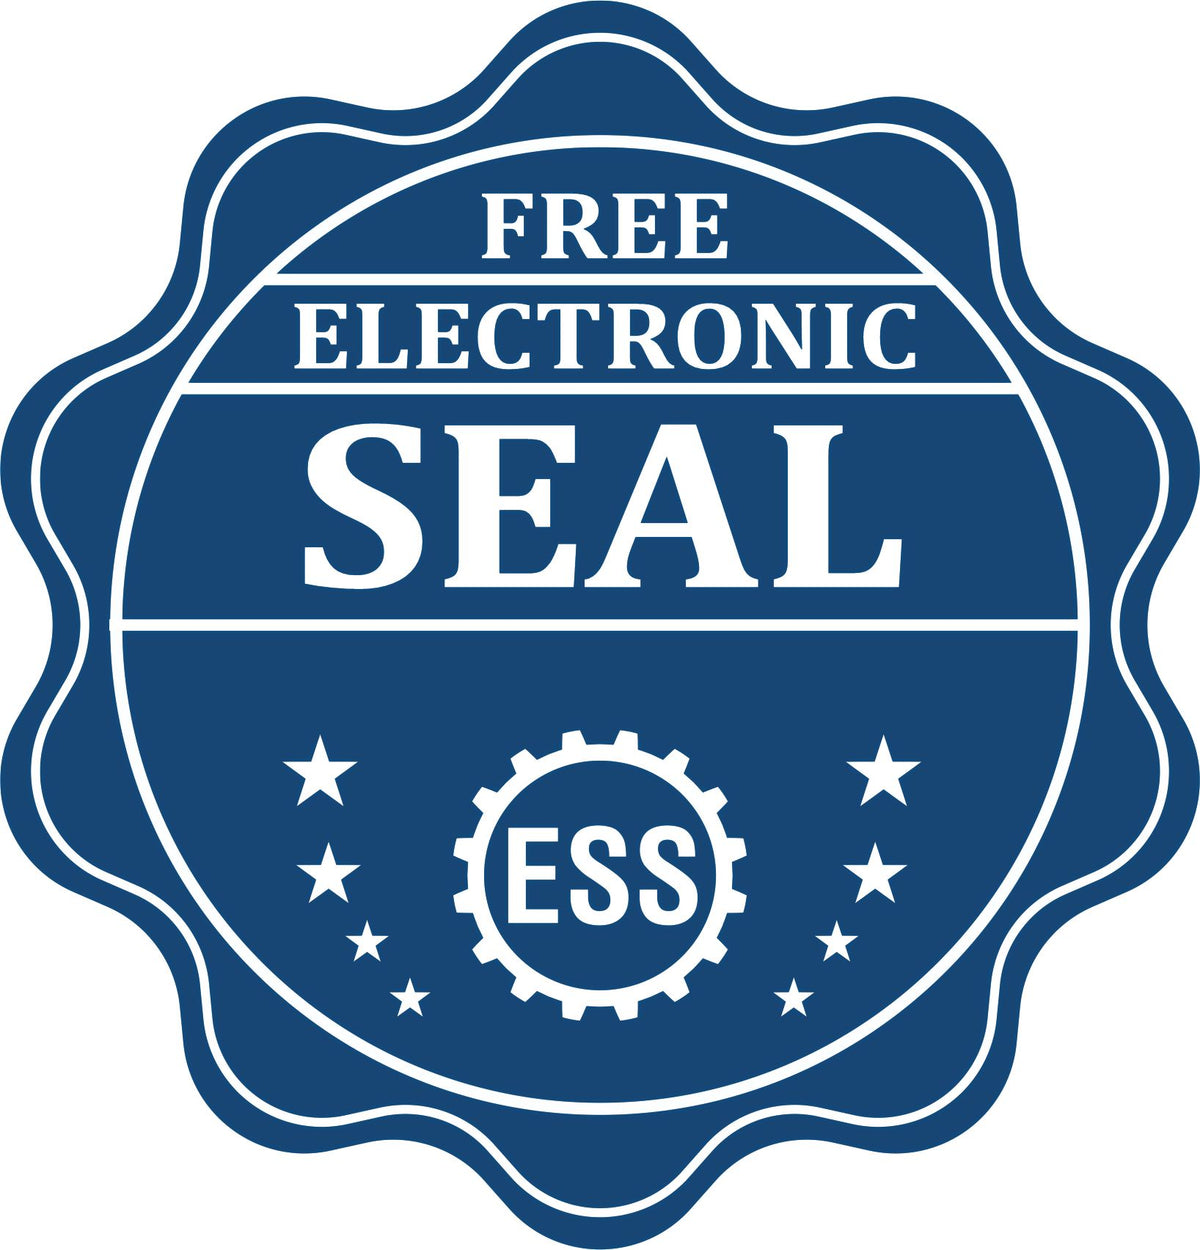 A badge showing a free electronic seal for the Hybrid Texas Engineer Seal with stars and the ESS gear on the emblem.